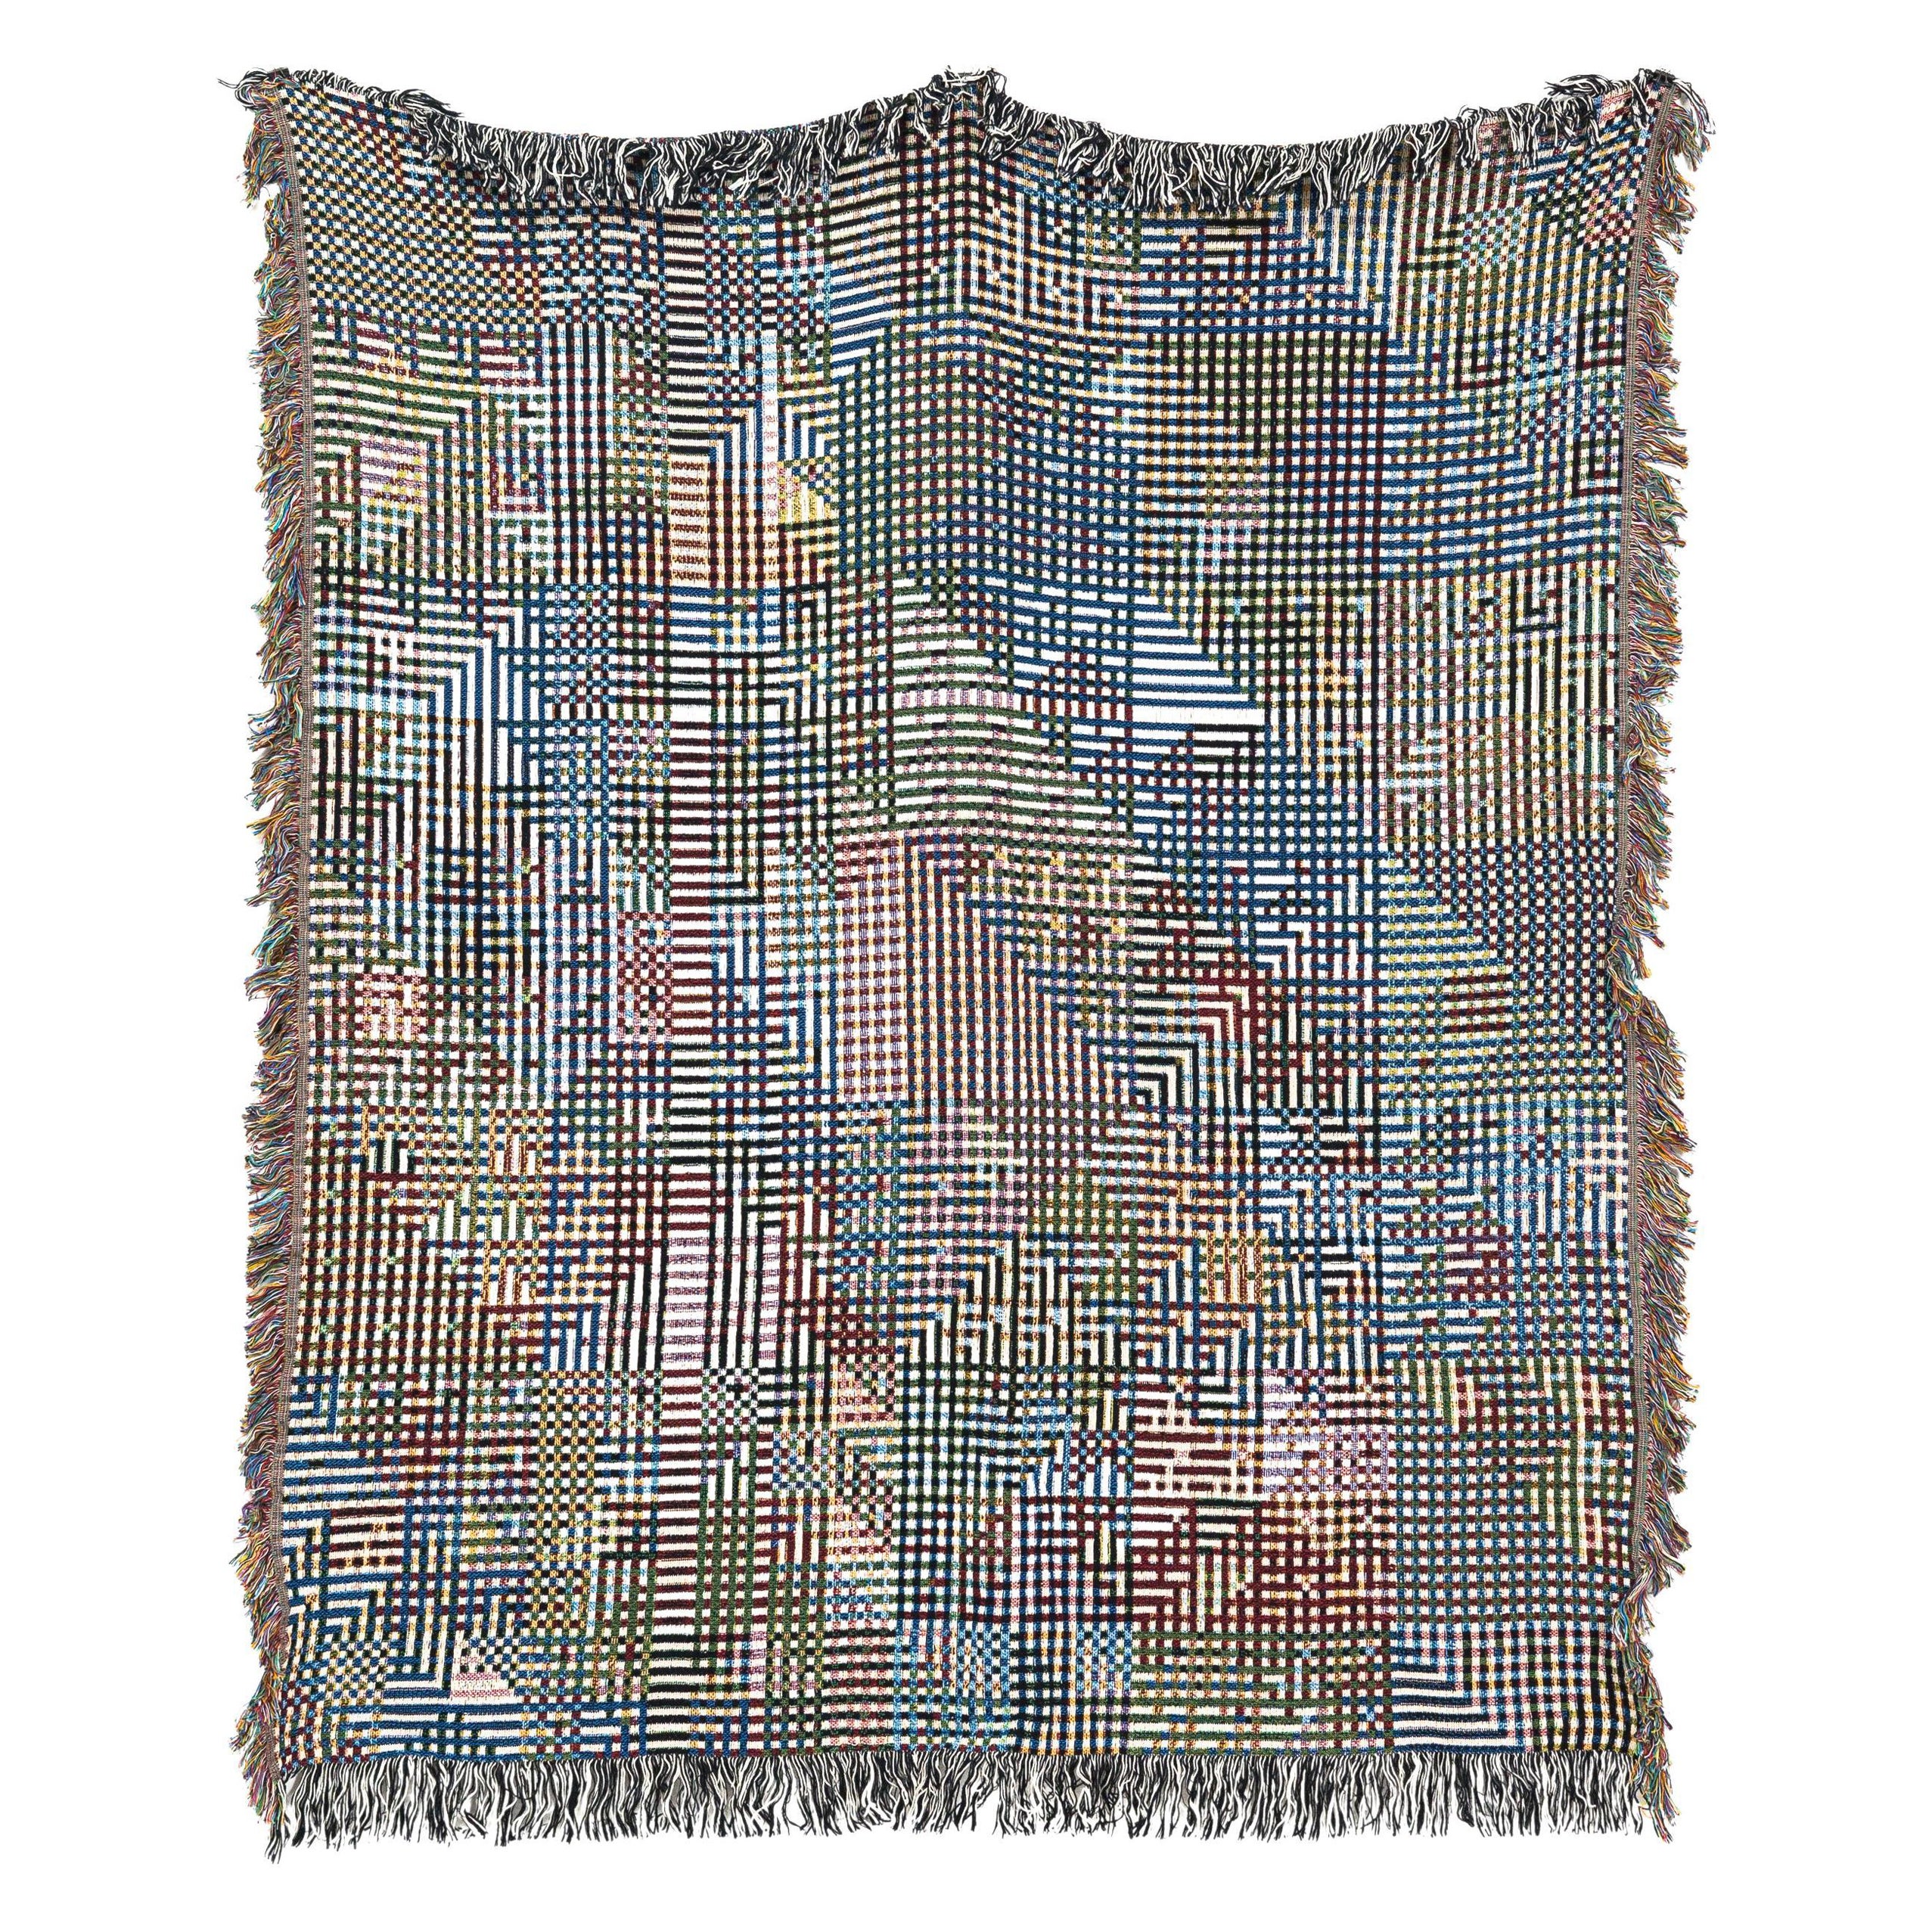 Bit Map 01, Luft Tanaka, Multicolor Graphic Woven Cotton Throw Blanket, 60"x80" For Sale